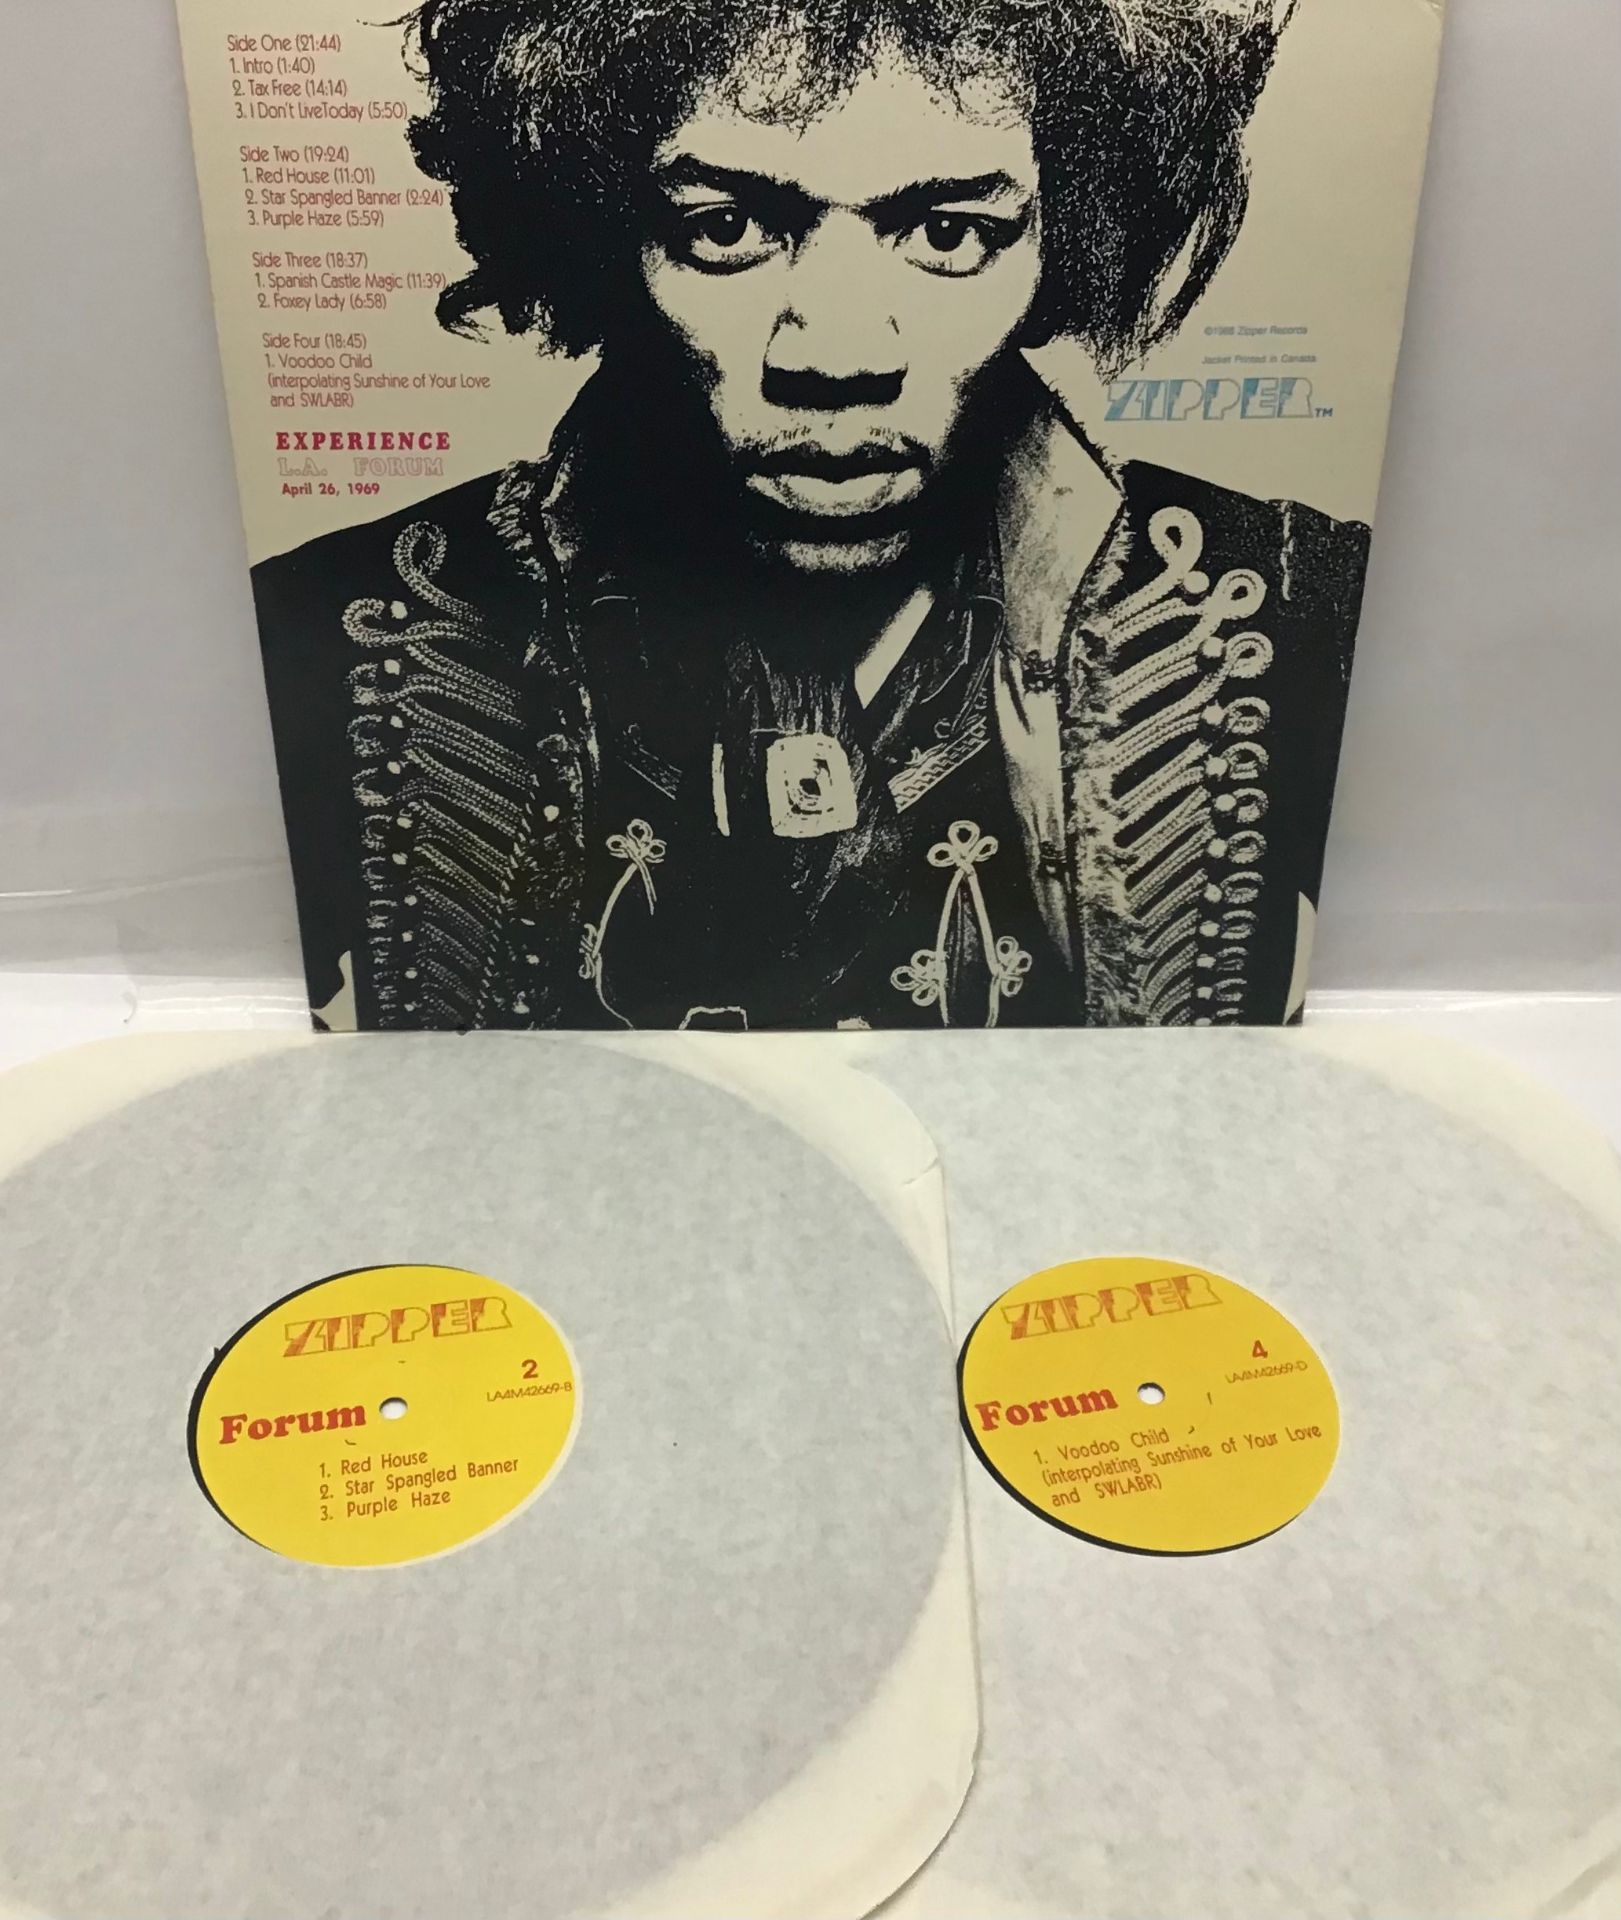 JIMI HENDRIX EXPERIENCE ‘LIVE AT THE L.A.FORUM’ VINYL ALBUM. Both records sound perfect and the - Image 2 of 2